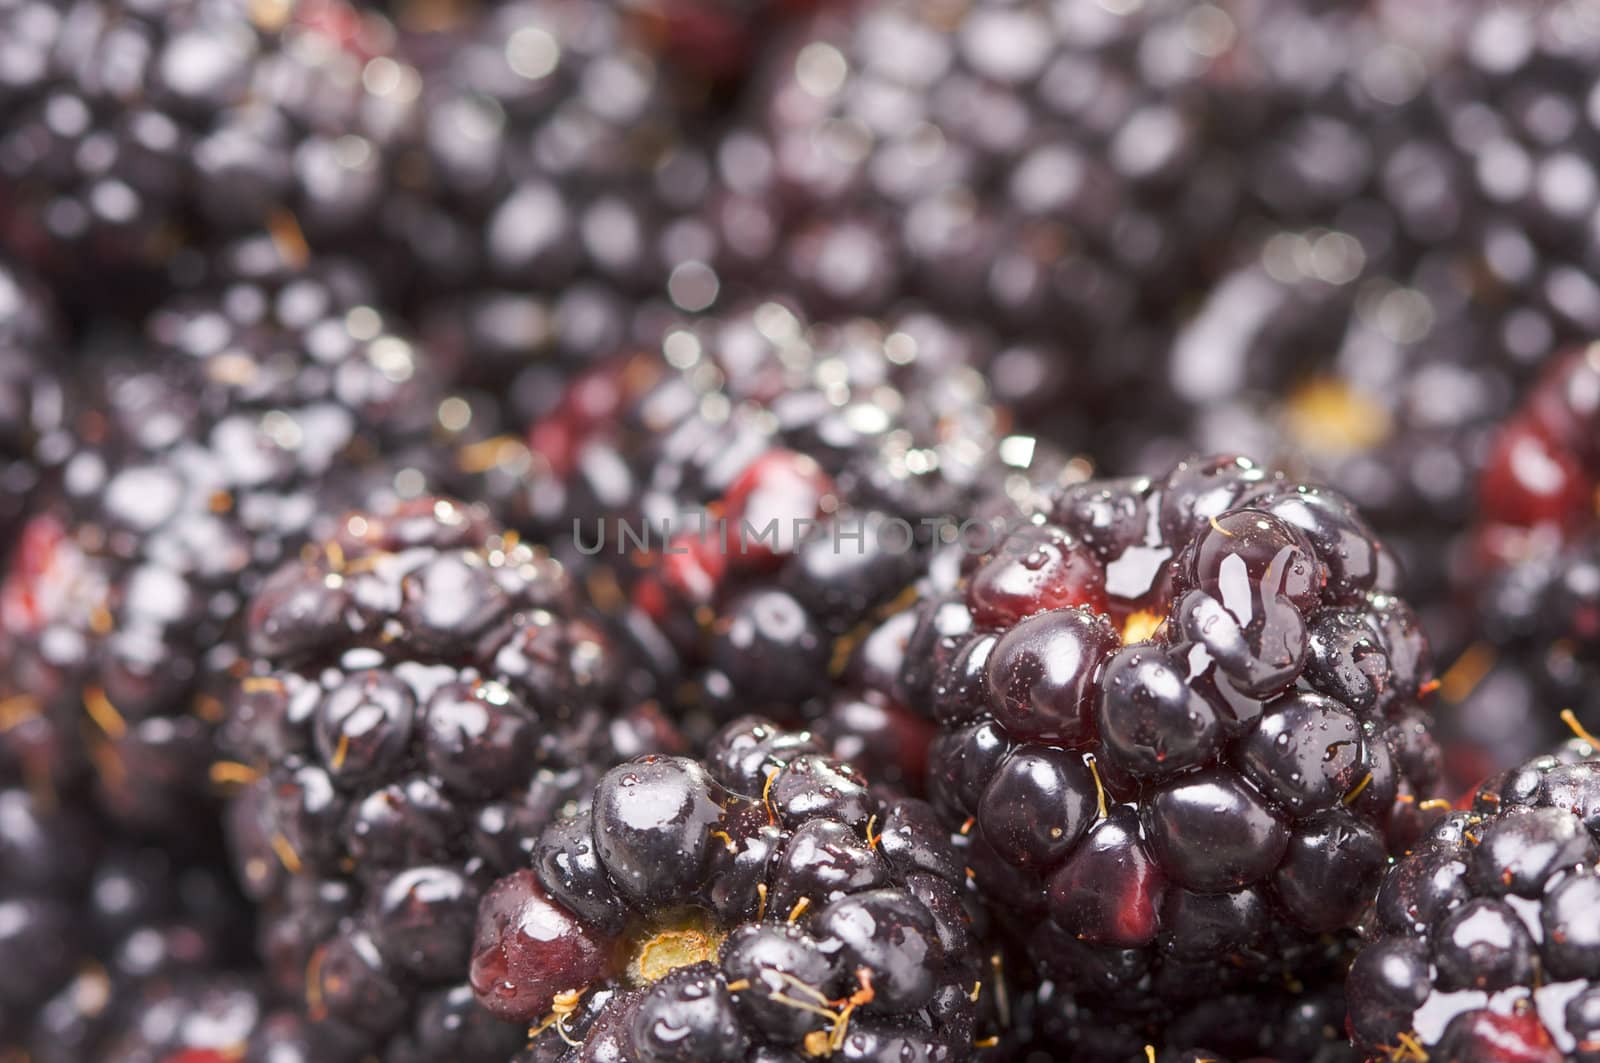 Macro Blackberries with Water Drops by Feverpitched